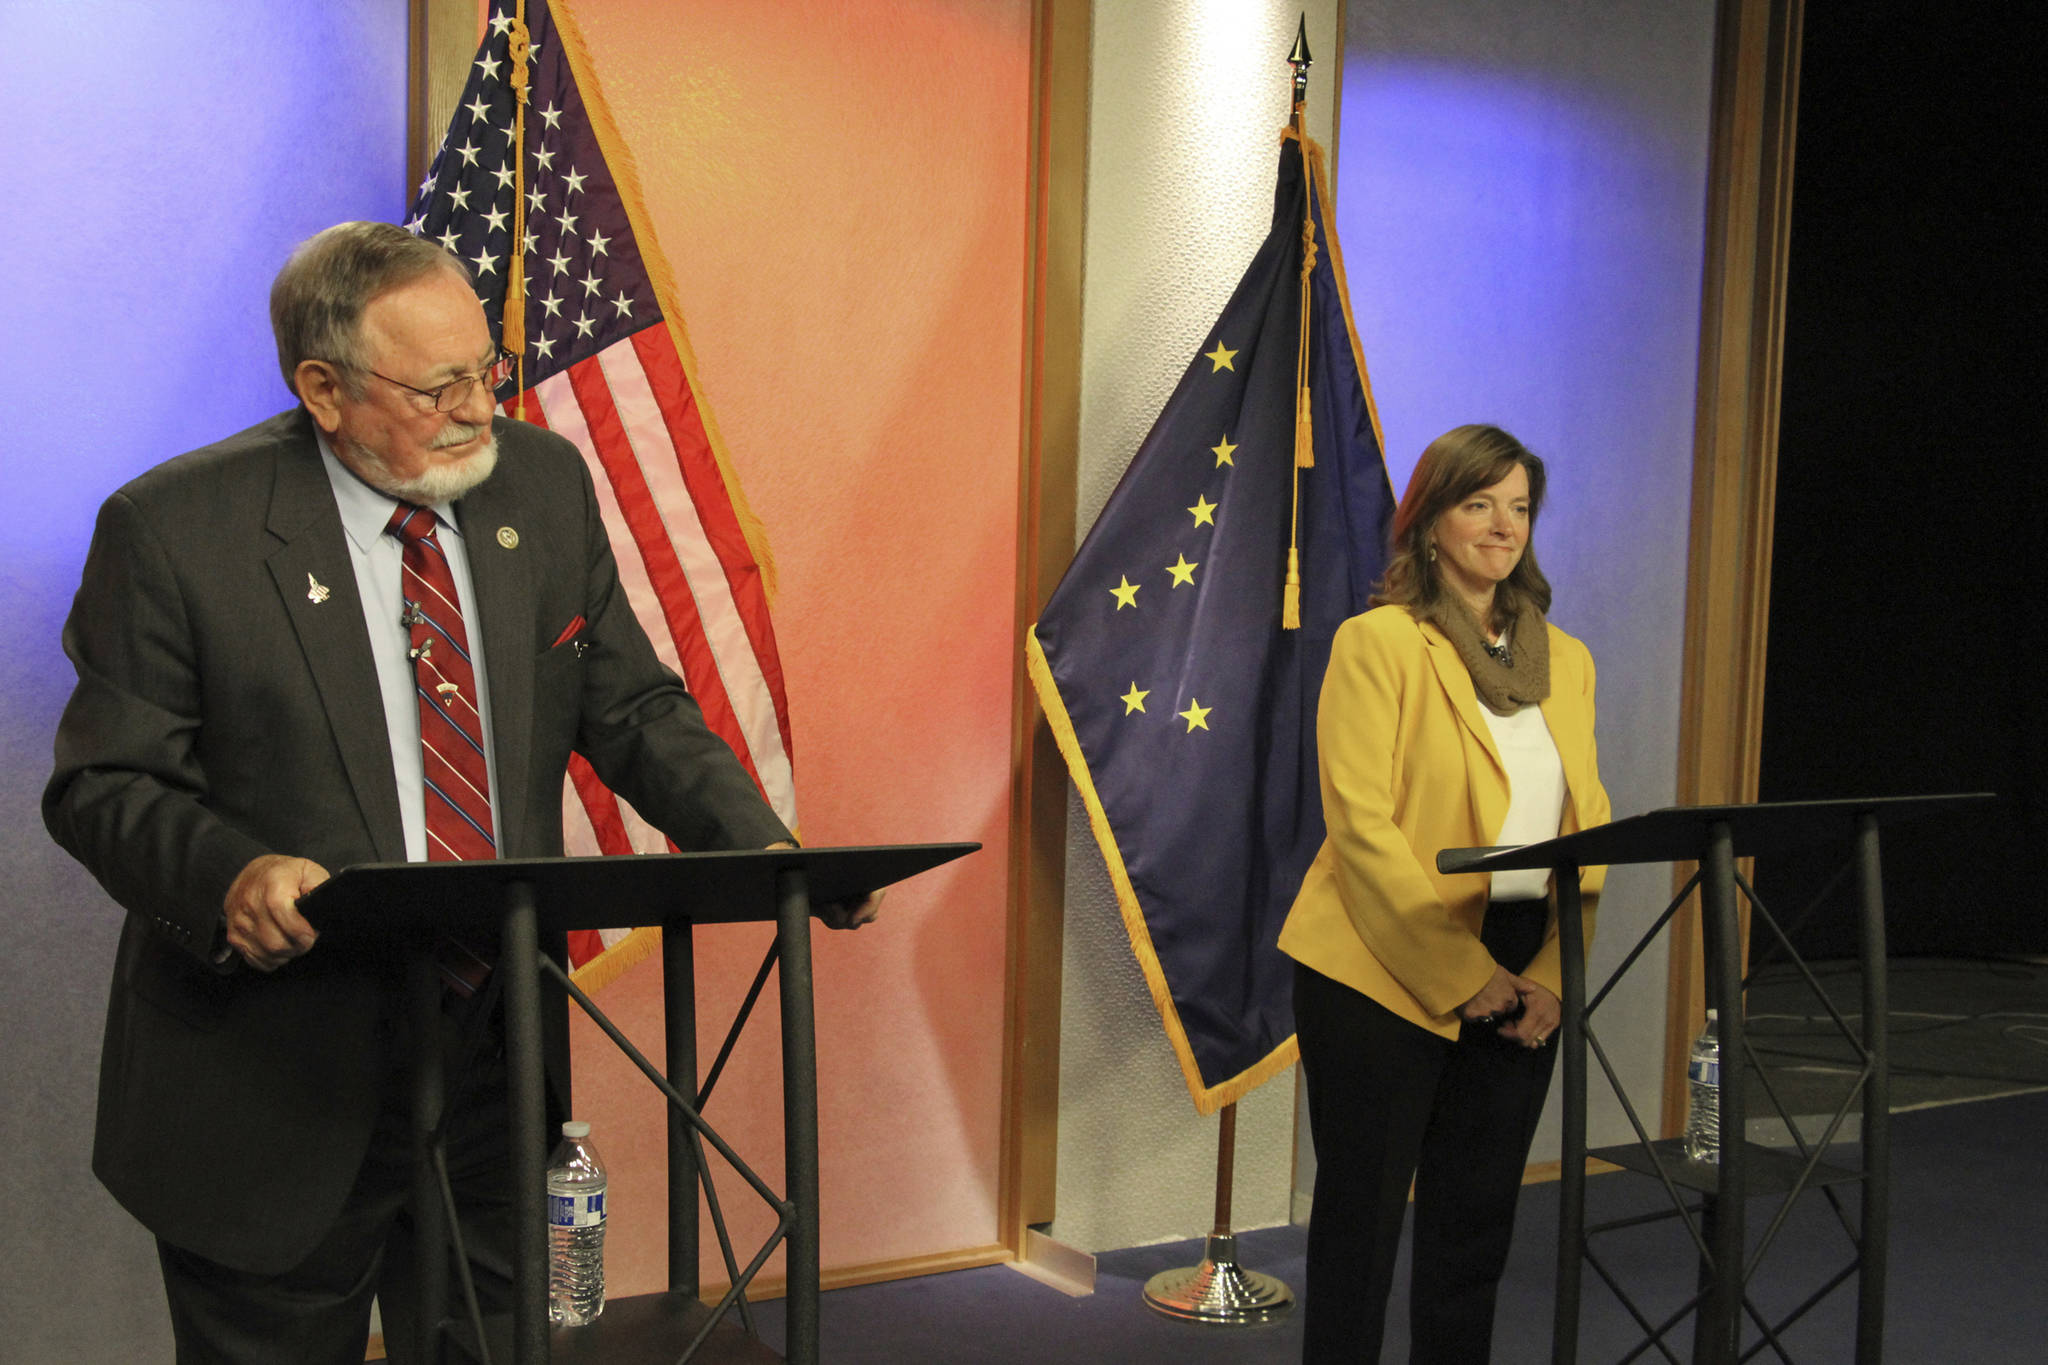 U.S. Rep. Don Young, left, and Alyse Galvin are shown prior to a debate Friday, Oct. 26, 2018, in Anchorage, Alaska. Galvin, an independent who won the Alaska Democratic primary, is challenging Young, a Republican who is the longest serving member of the House. (Mark Thiessen | Associated Press)